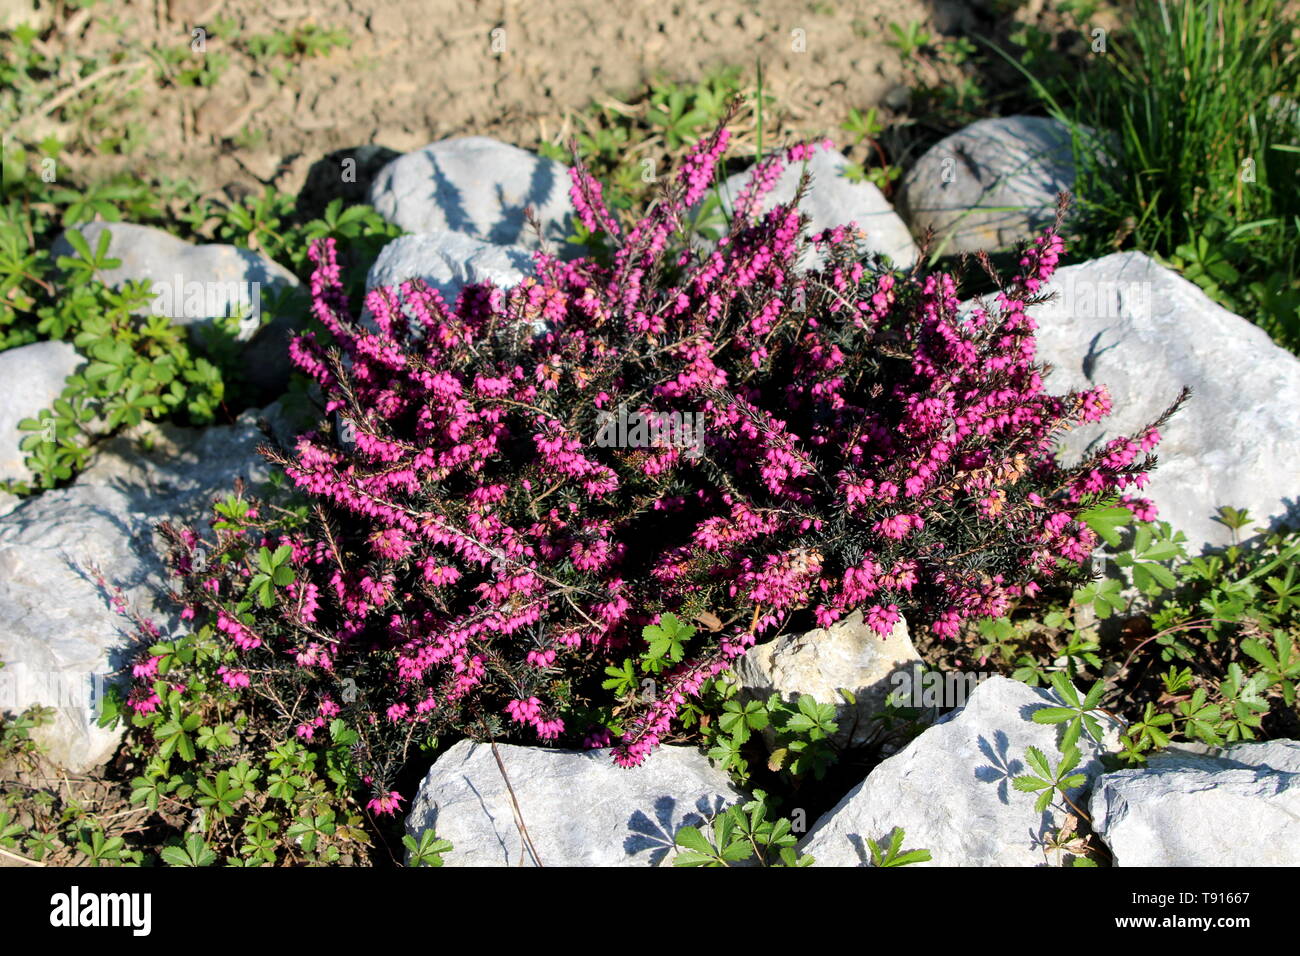 Common heather or Calluna vulgaris or Ling or Heather low growing perennial shrub flowering plant with dense purple flowers in racemes Stock Photo